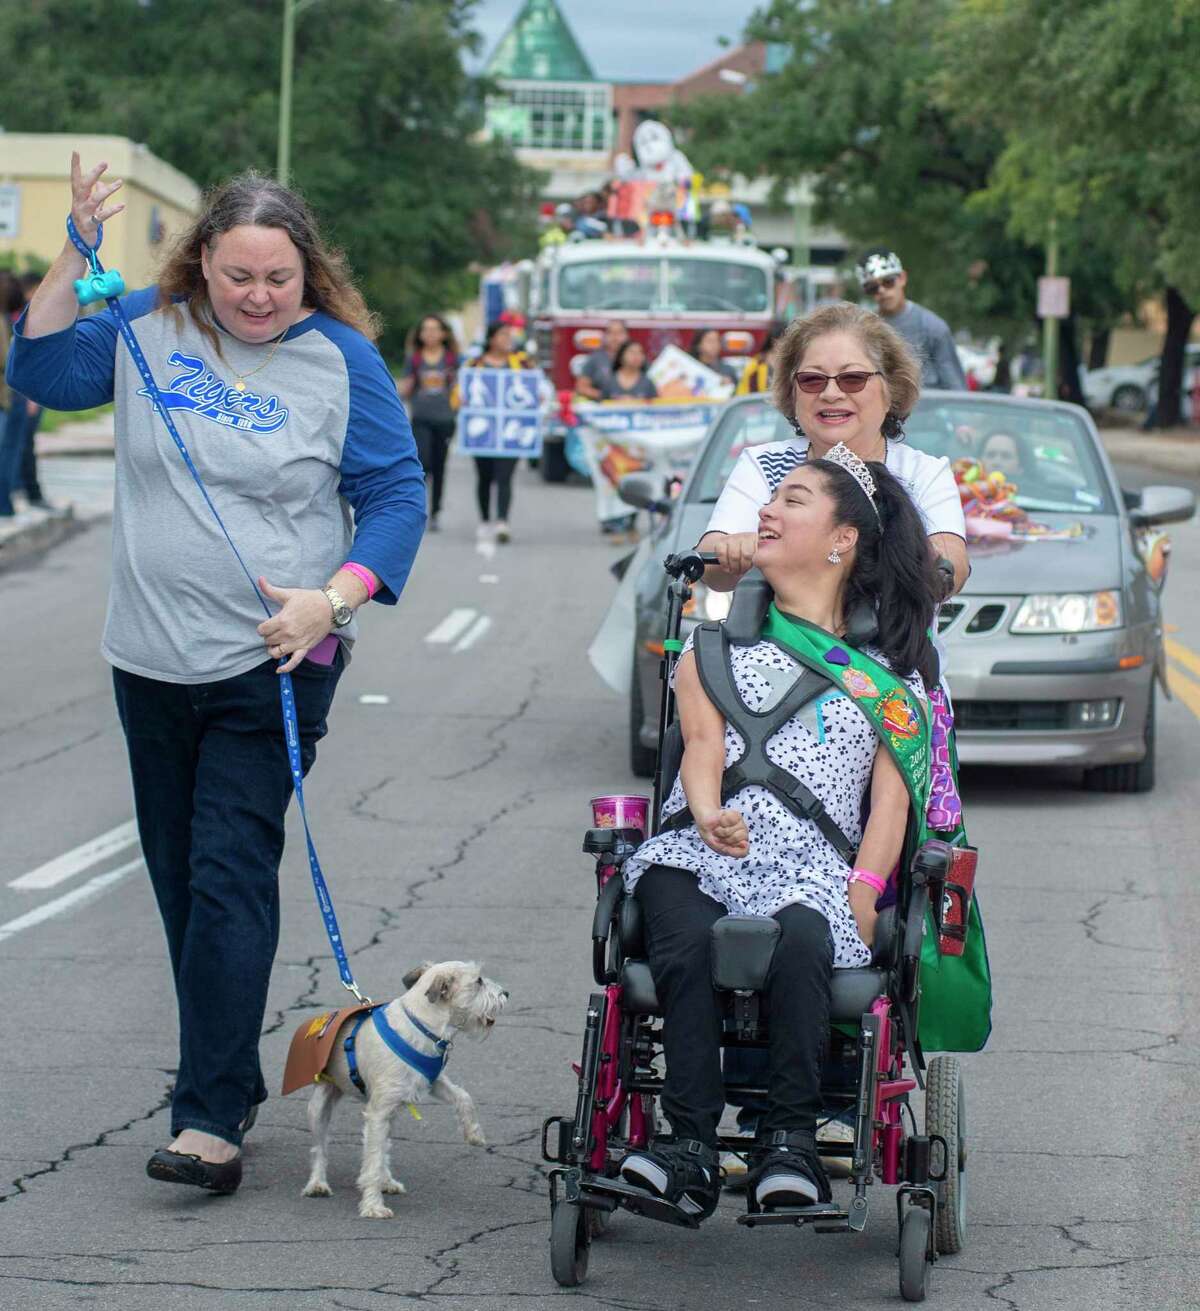 The 2018 Fiesta Especial Queen Vanesa Serana, 21, and Gypsy the dog participate in the inaugural abilitySTRONG Parade in October 2018. This year’s parade and festival starts Saturday at 9 a.m. with the parade and march, followed by the festival at Market Square downtown.